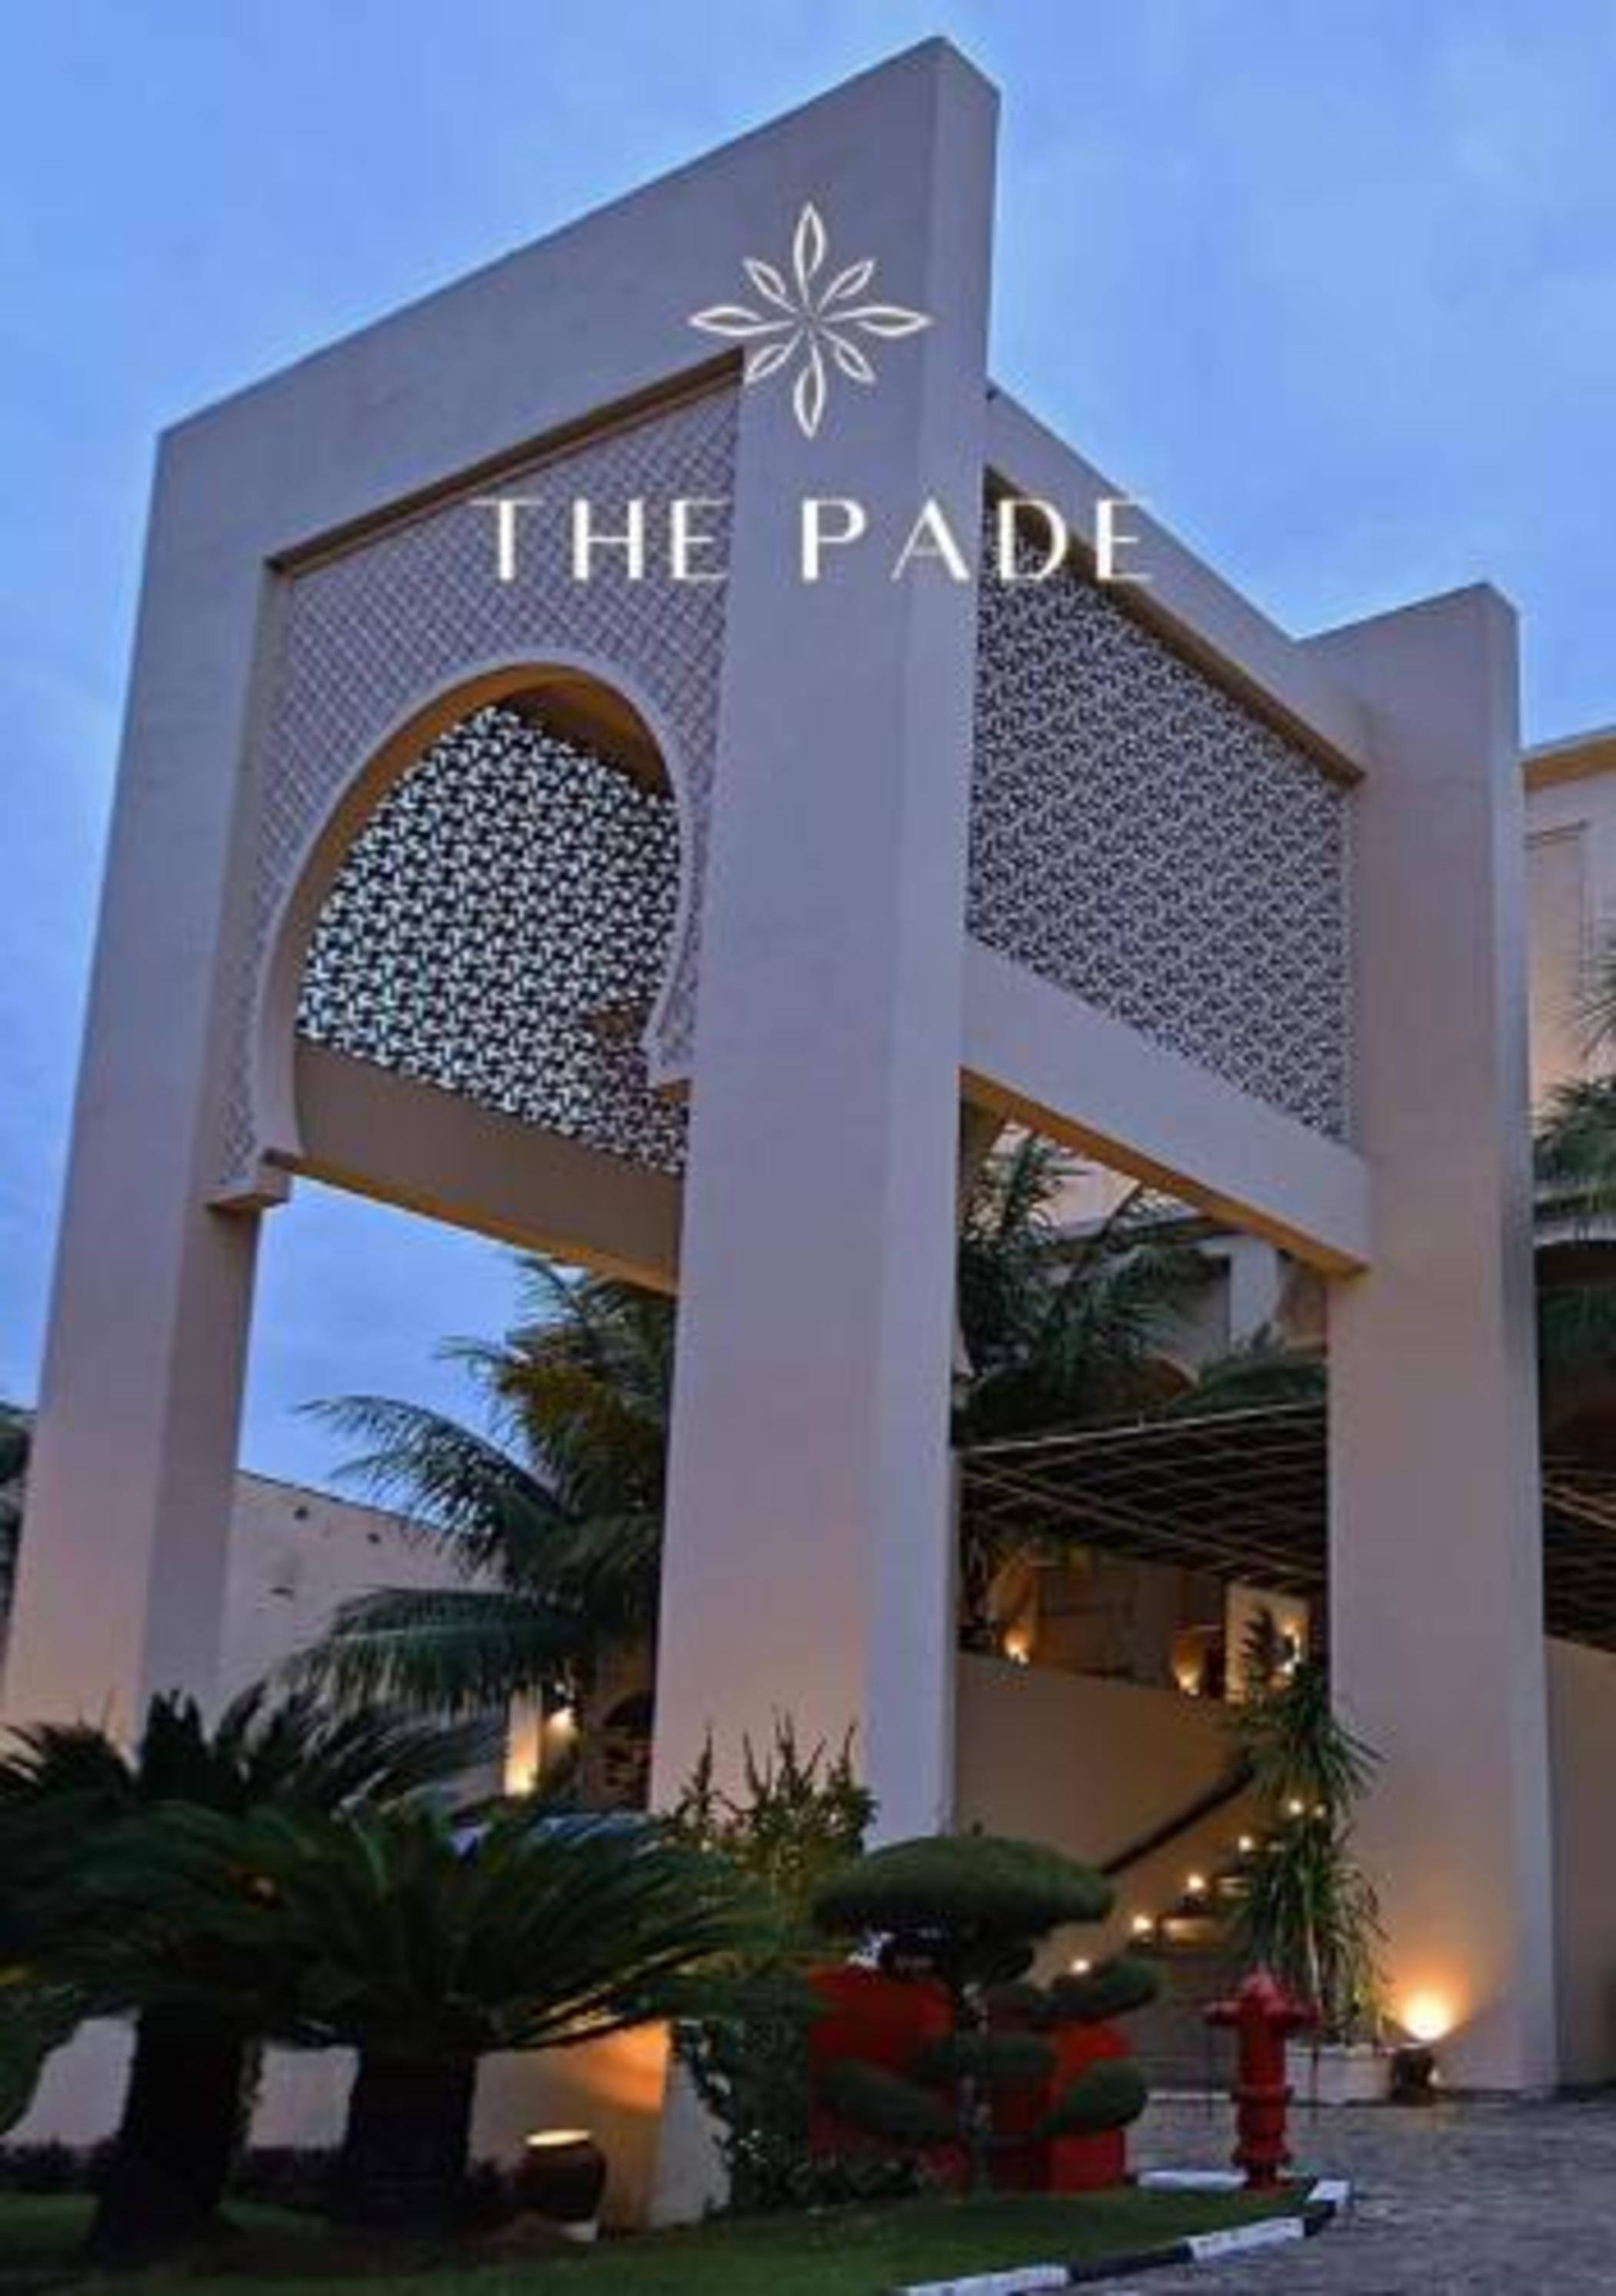 The Pade Hotel image